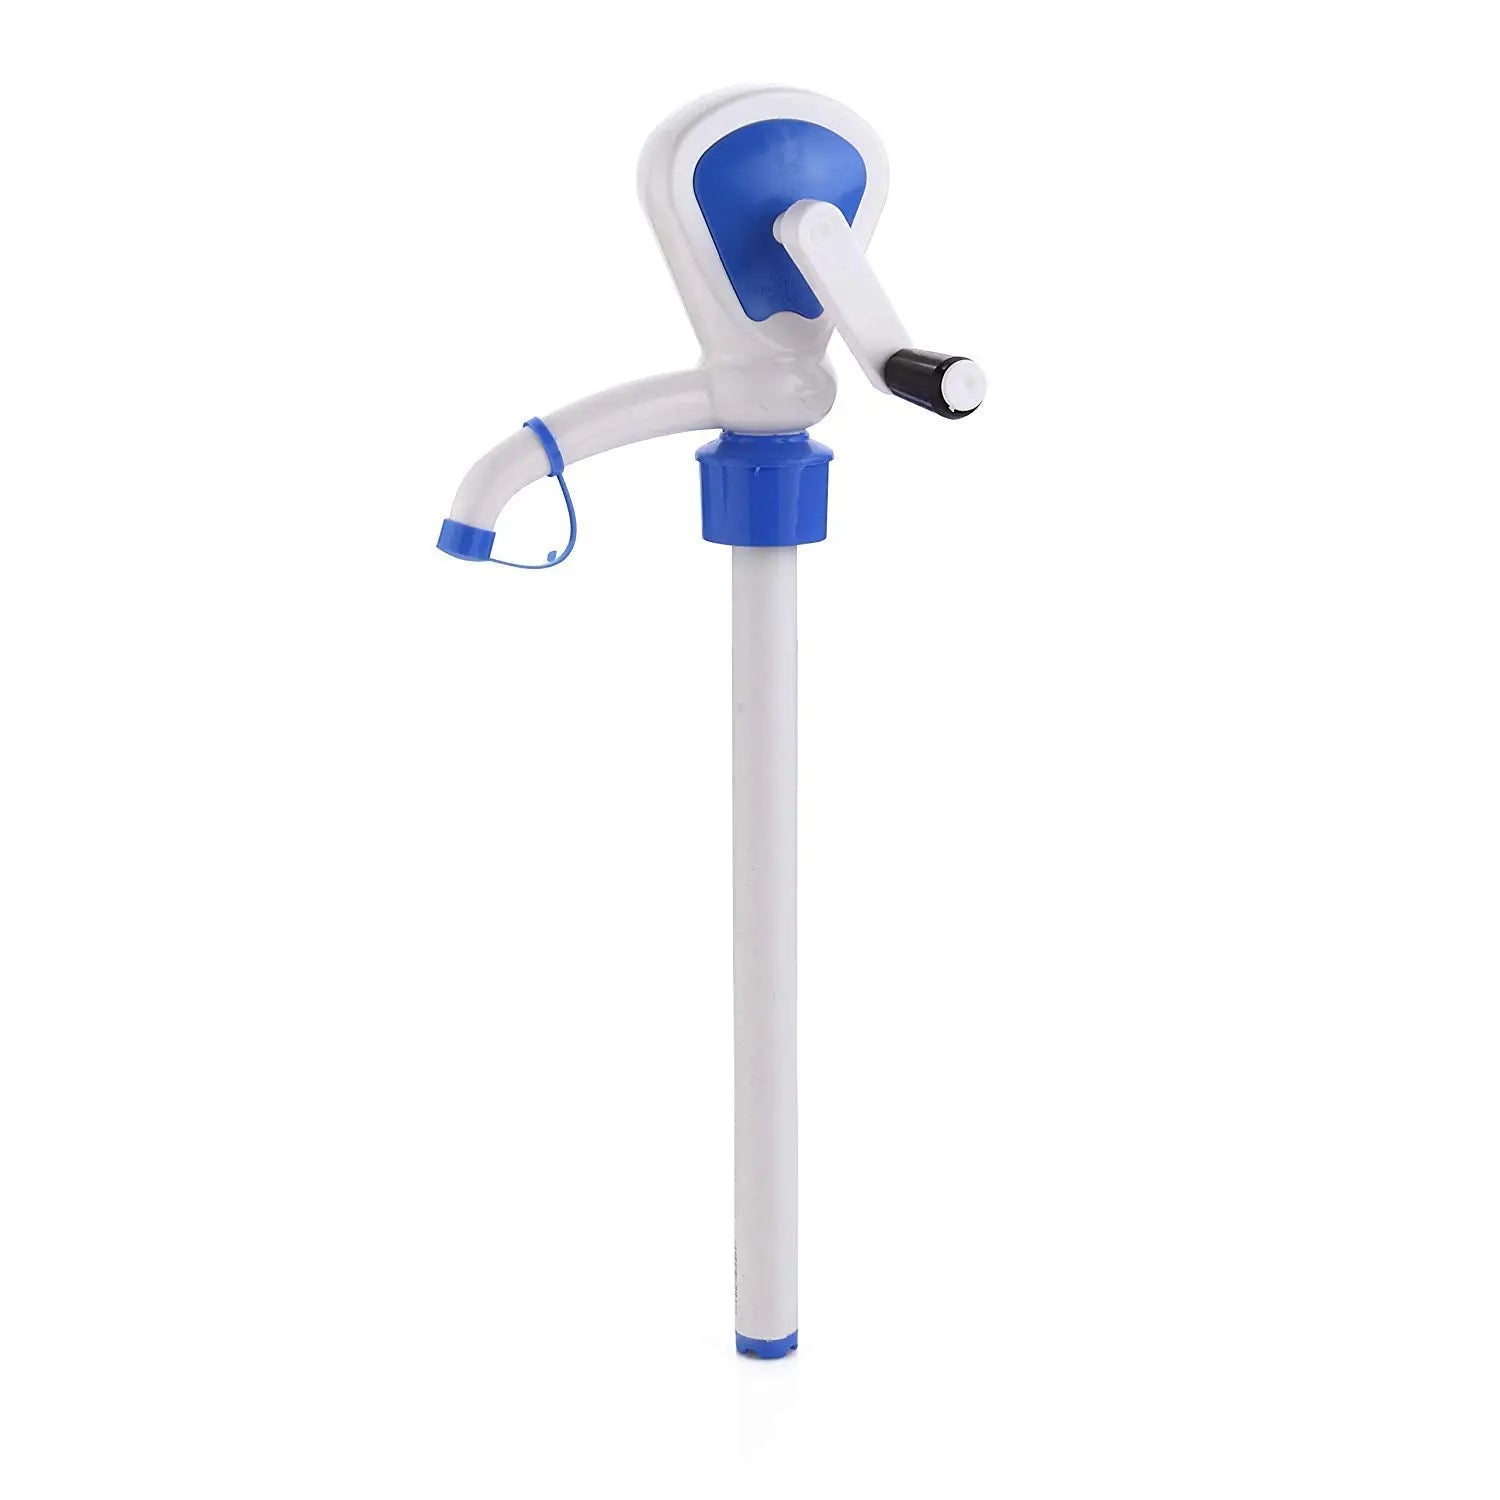 Hand Operated Oil Dispenser Pump for Kitchen Oil Drums